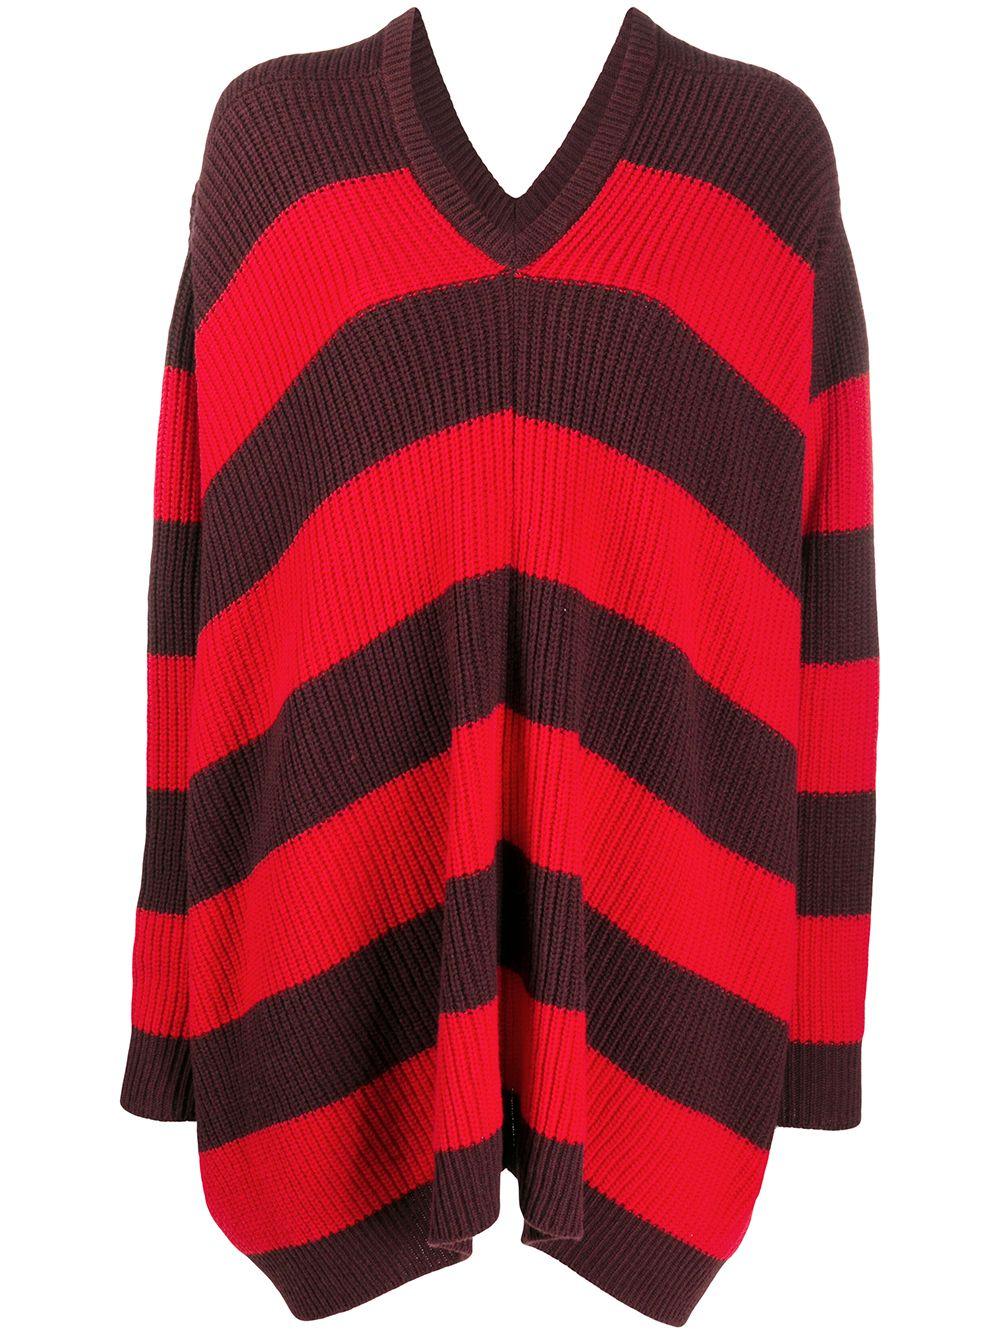 Marni Ribbed Knit Striped Jumper in Red - Lyst